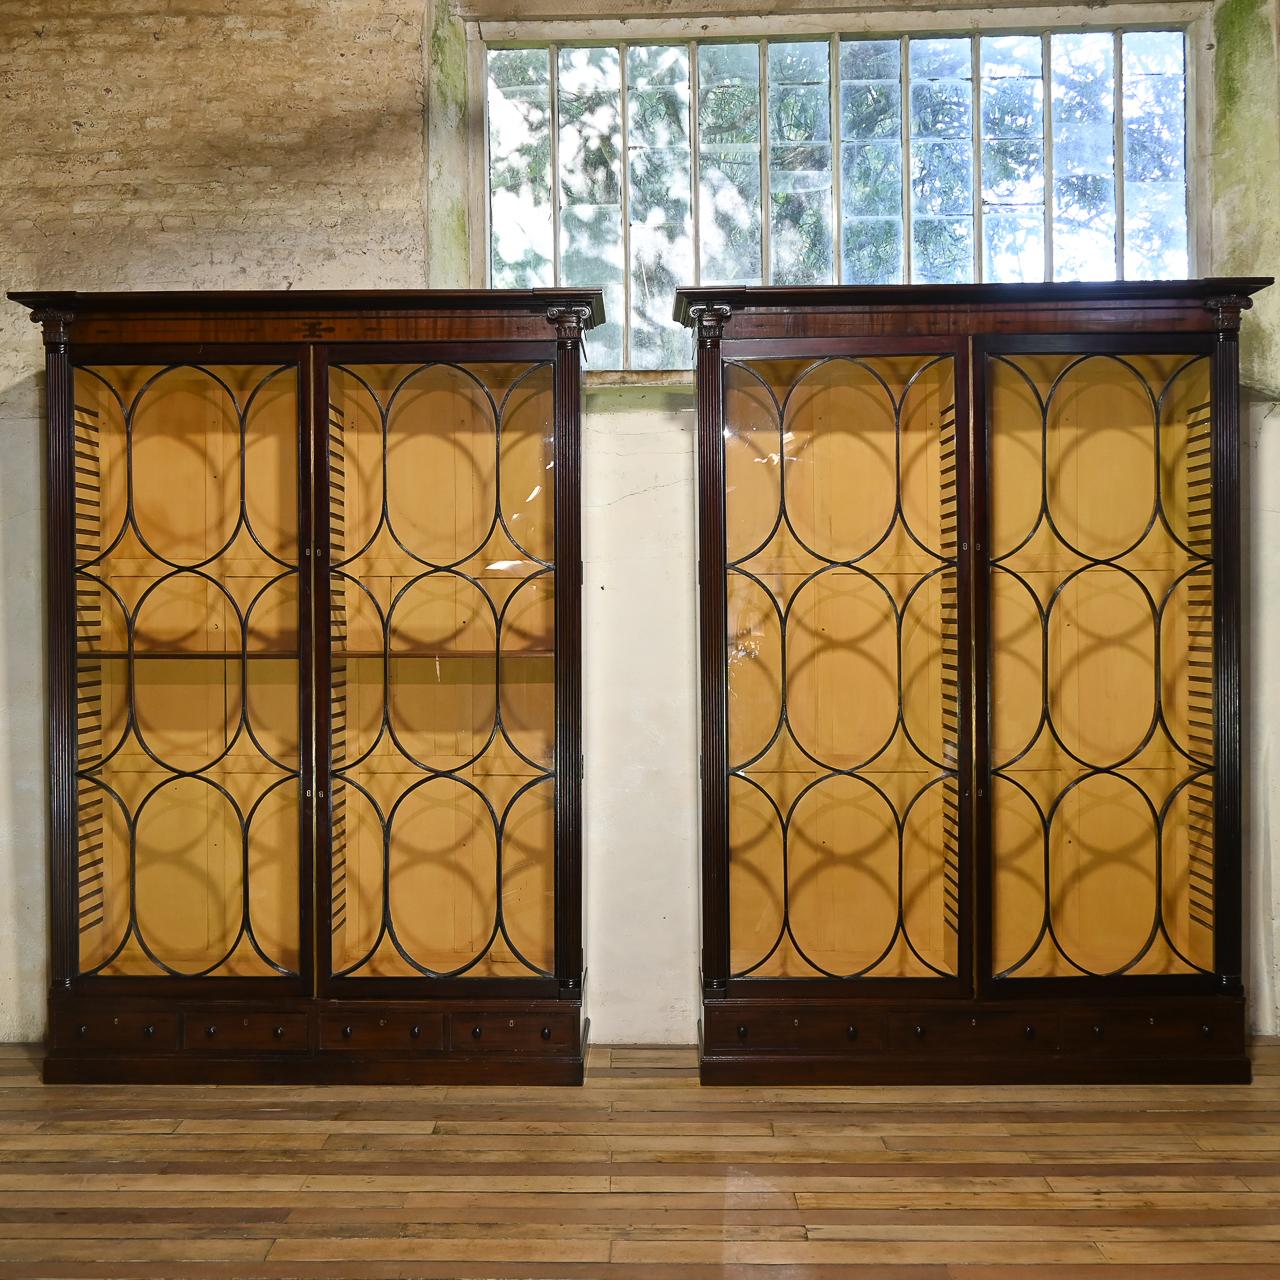 An extraordinary near pair of oversized Regency astral glazed library bookcases c.1810. 
Demonstrating a remarkable pair of full-length oval astragal glazed doors to each - with carved reeded detailing. The interior features a warm cadmium yellow